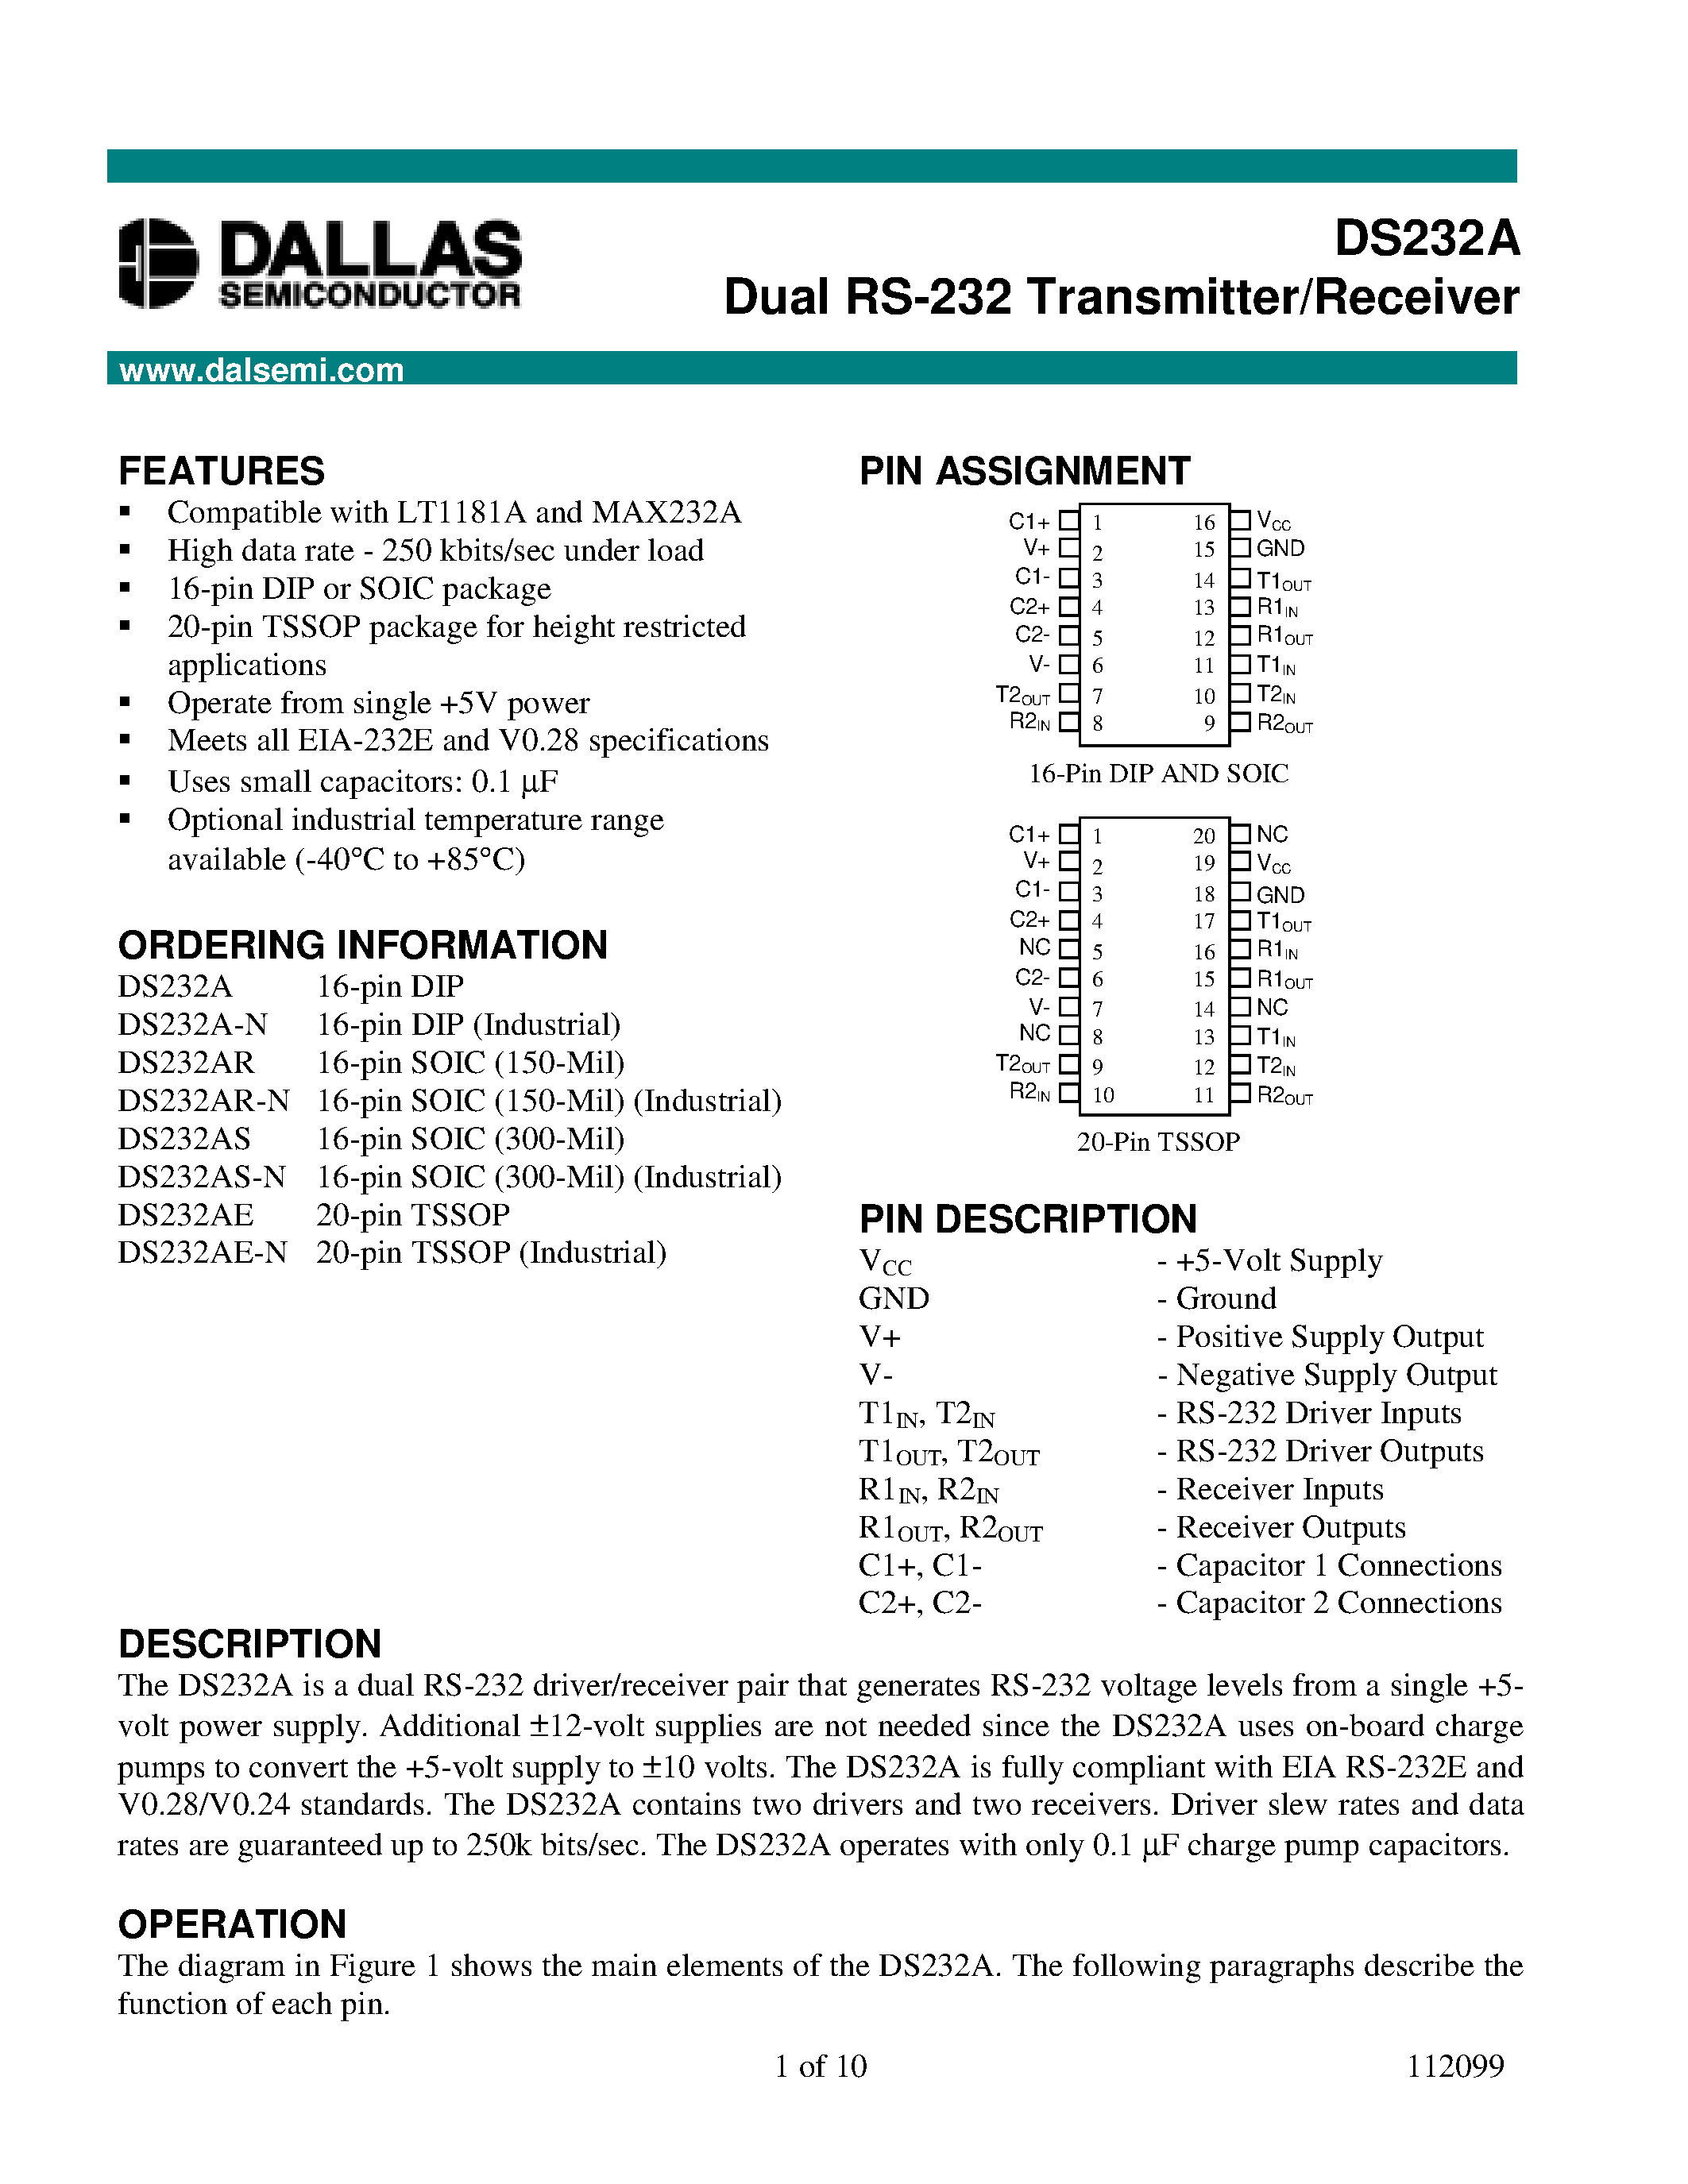 Datasheet DS232AS-N - Dual RS-232 Transmitter/Receiver page 1